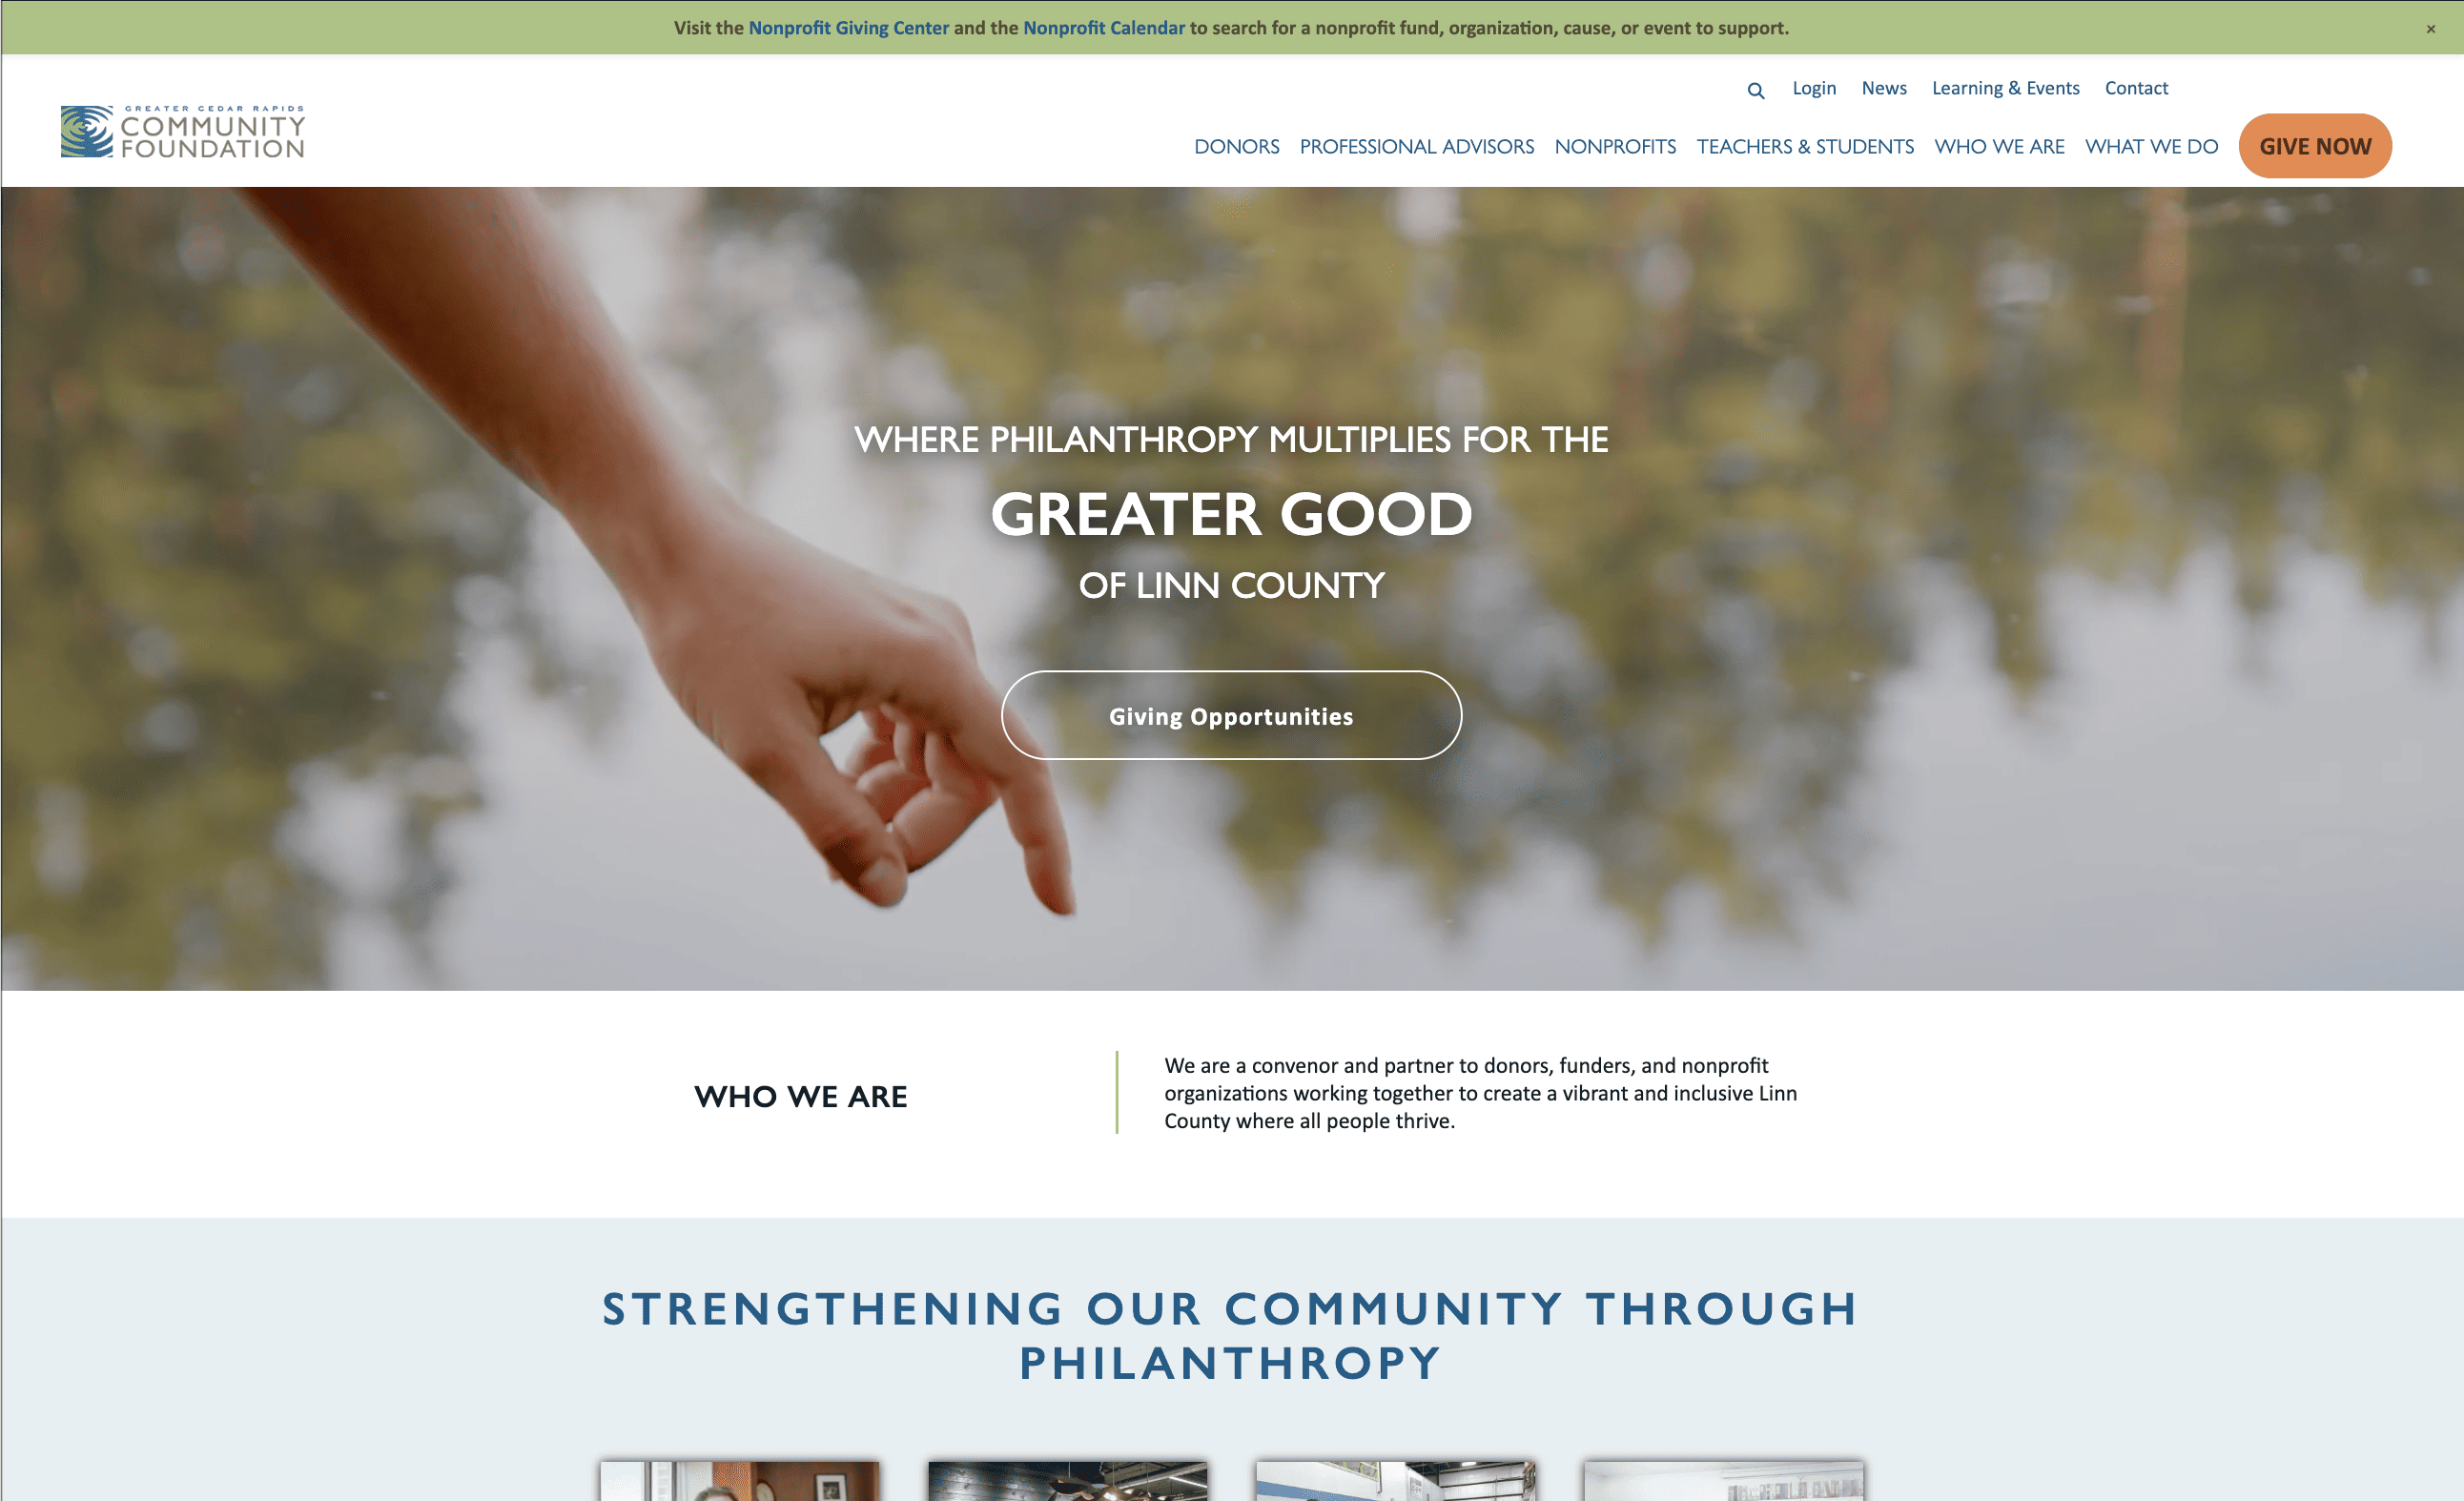 A screenshot of the Community Foundation website's homepage.